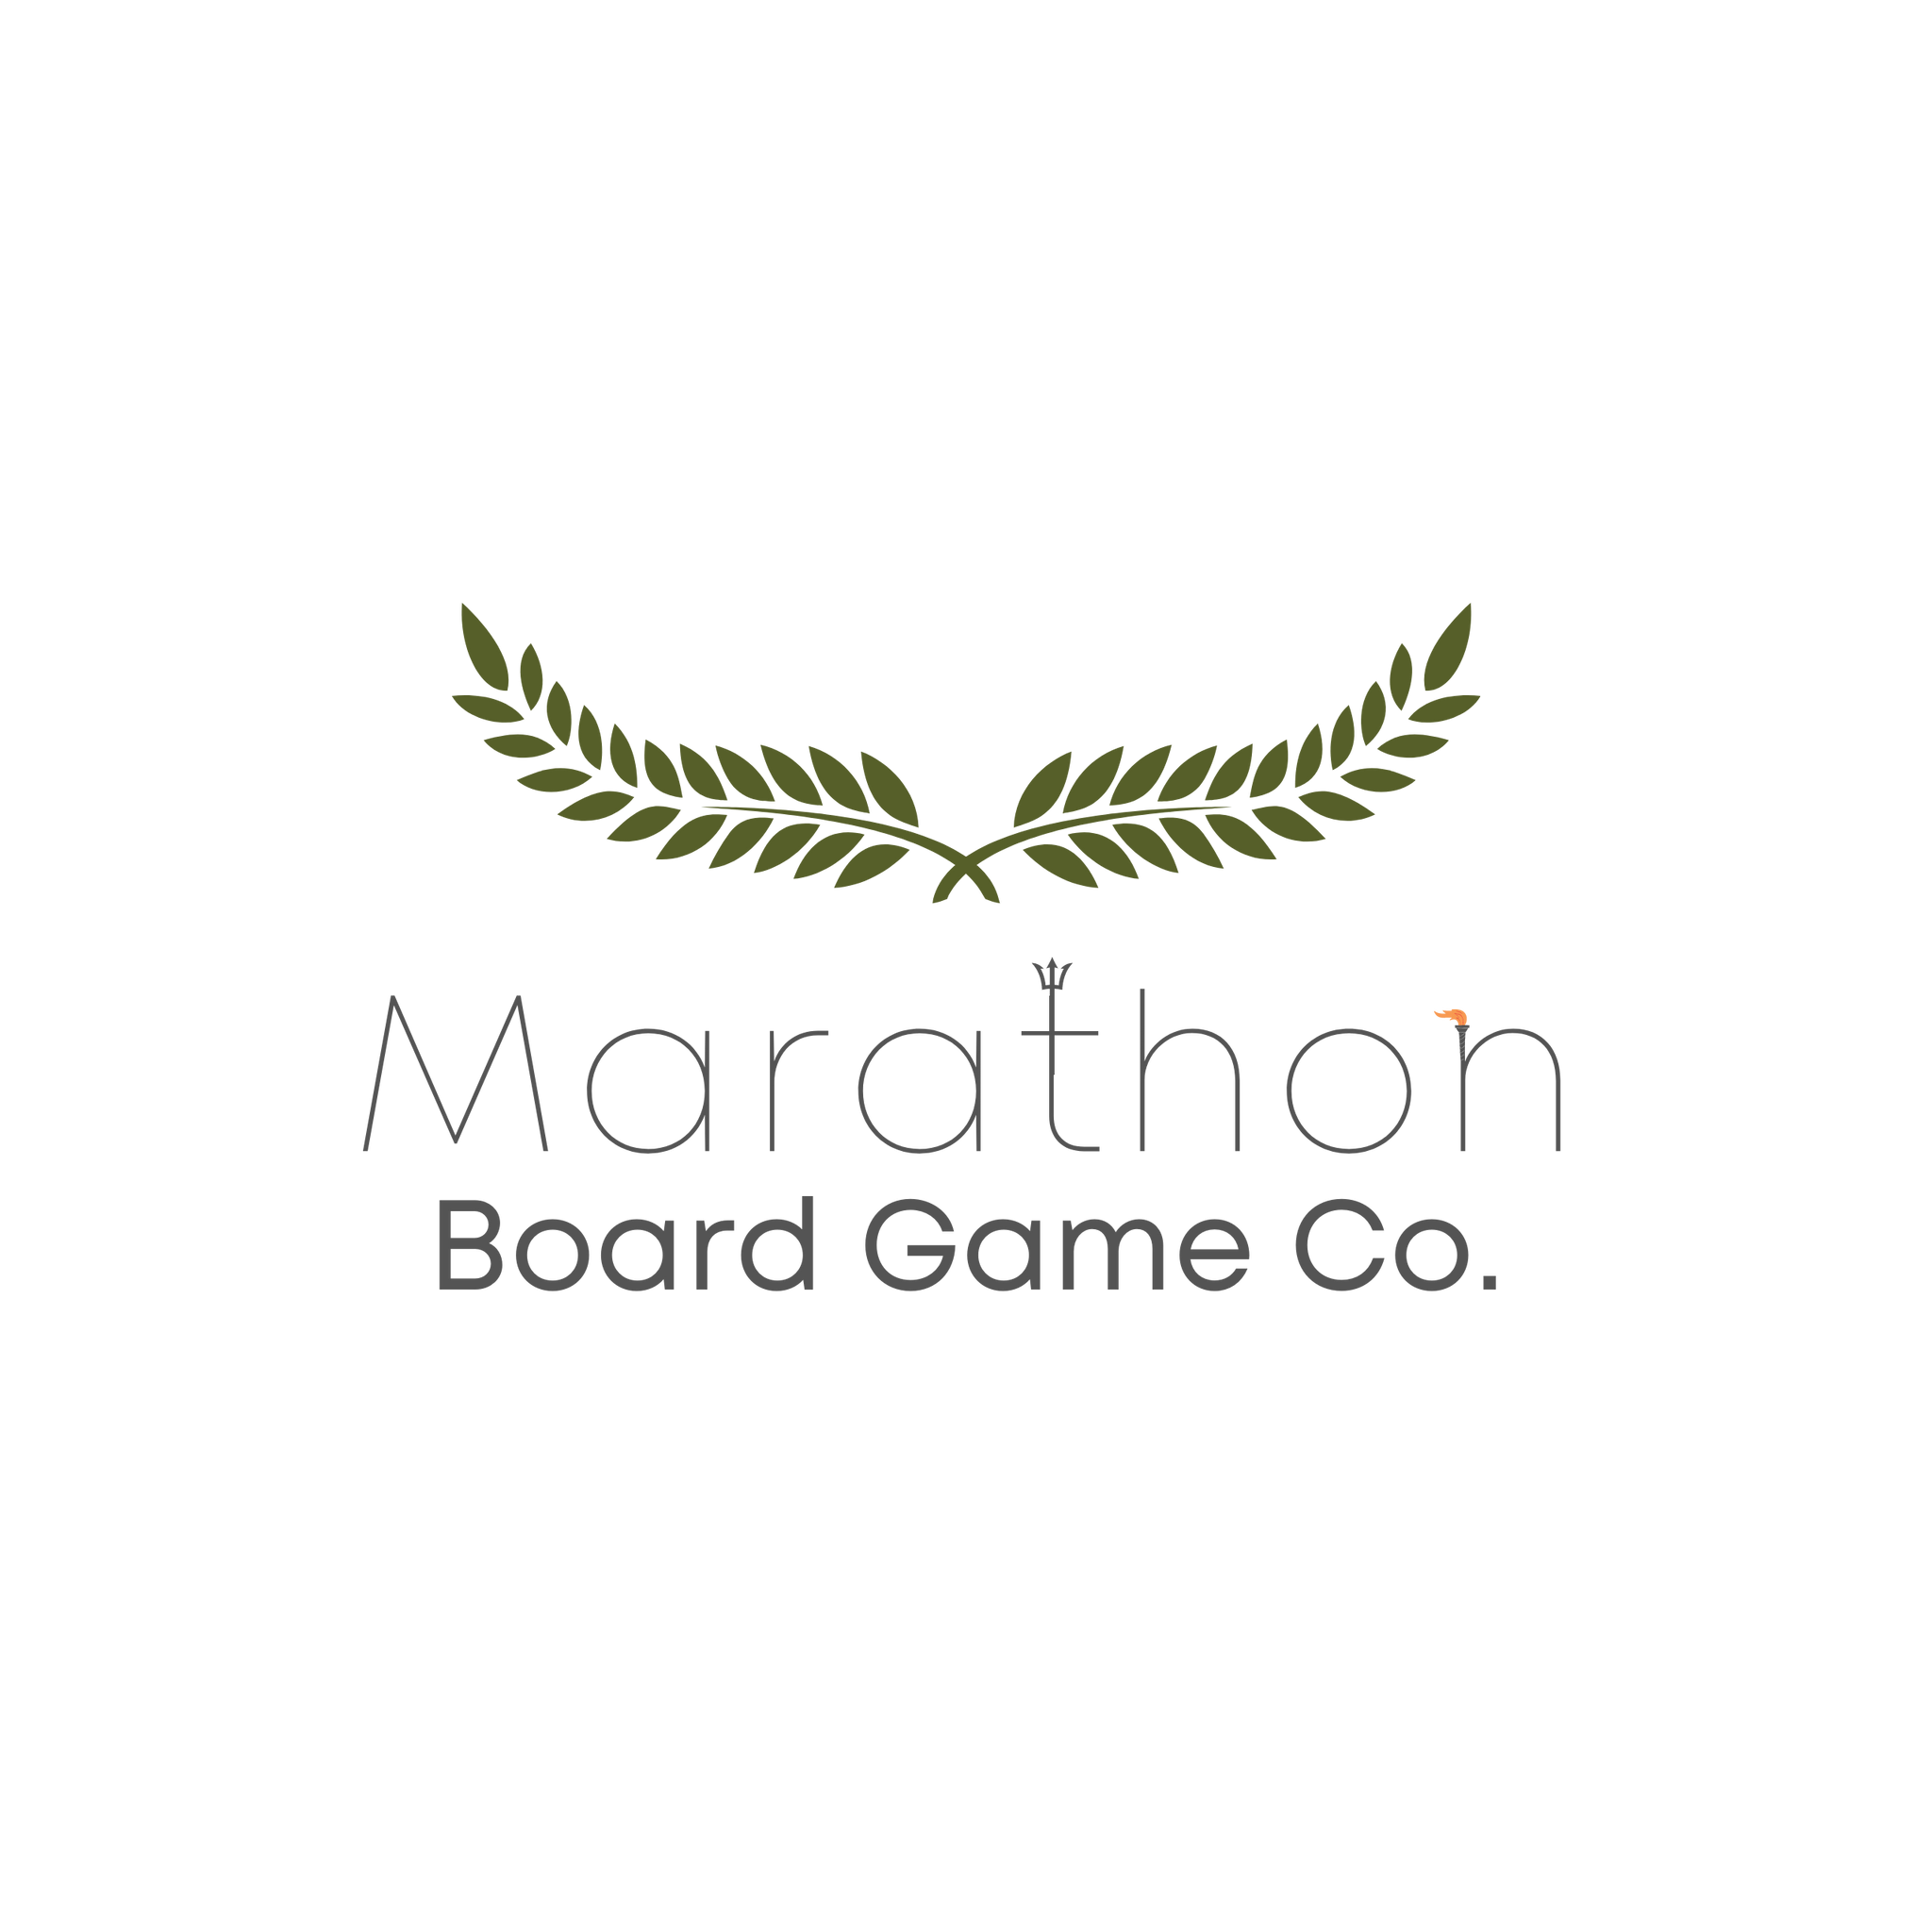 This is the logo of a Canadian board game company called Marathon Board Game Co.